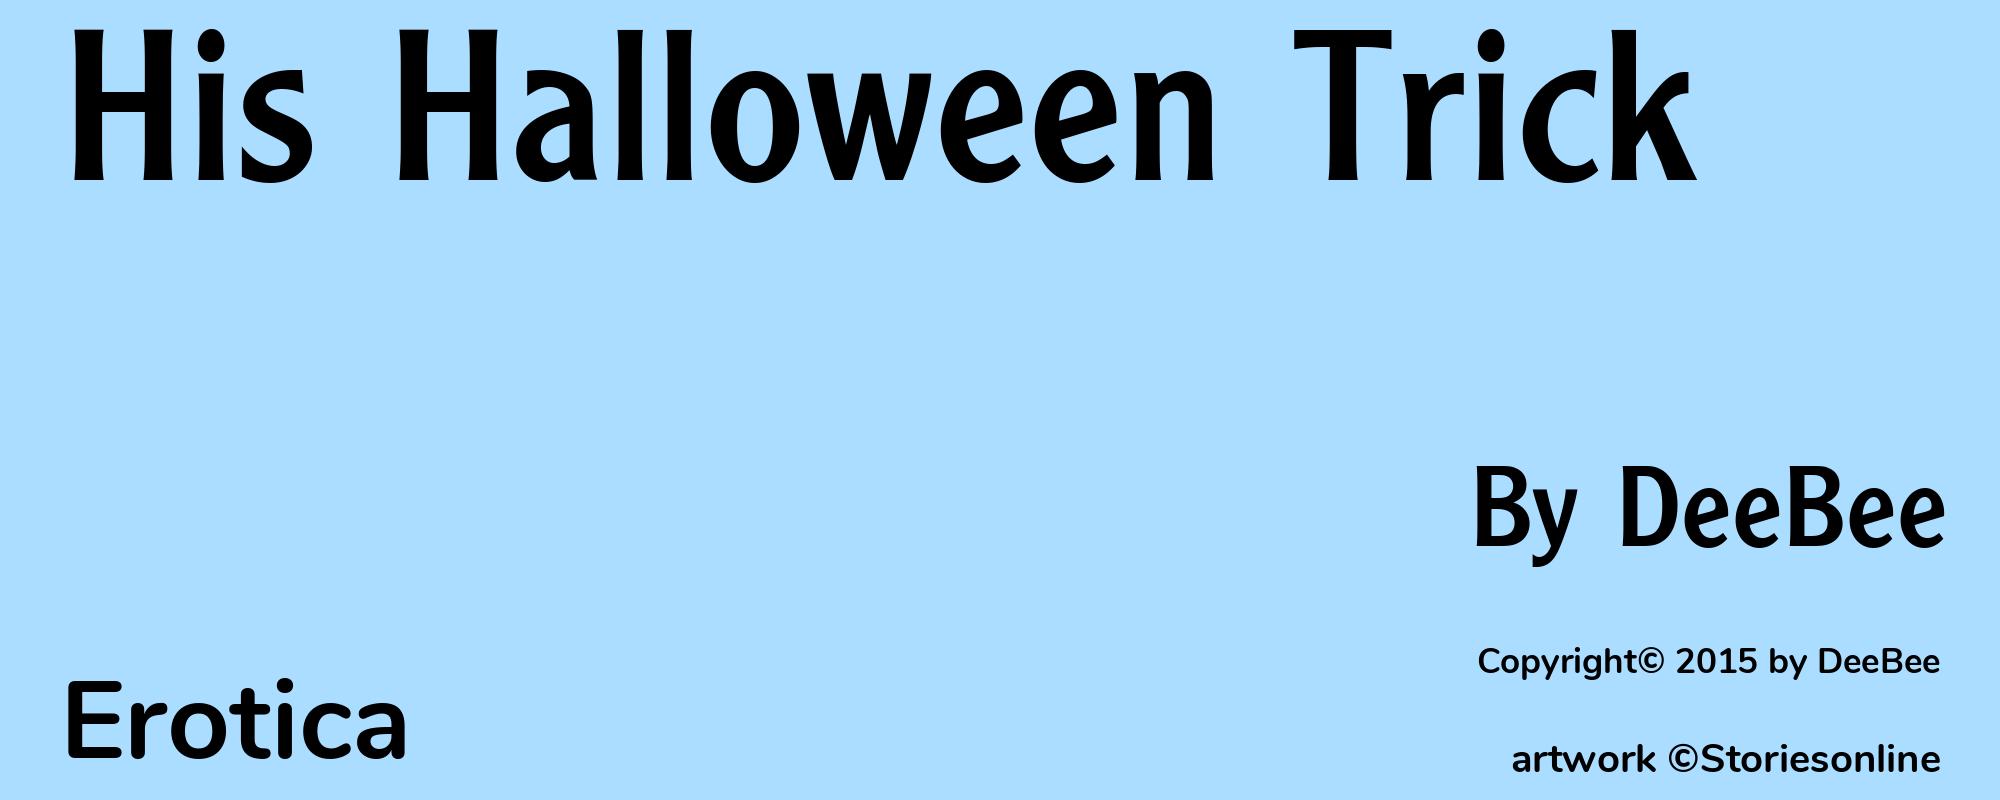 His Halloween Trick - Cover